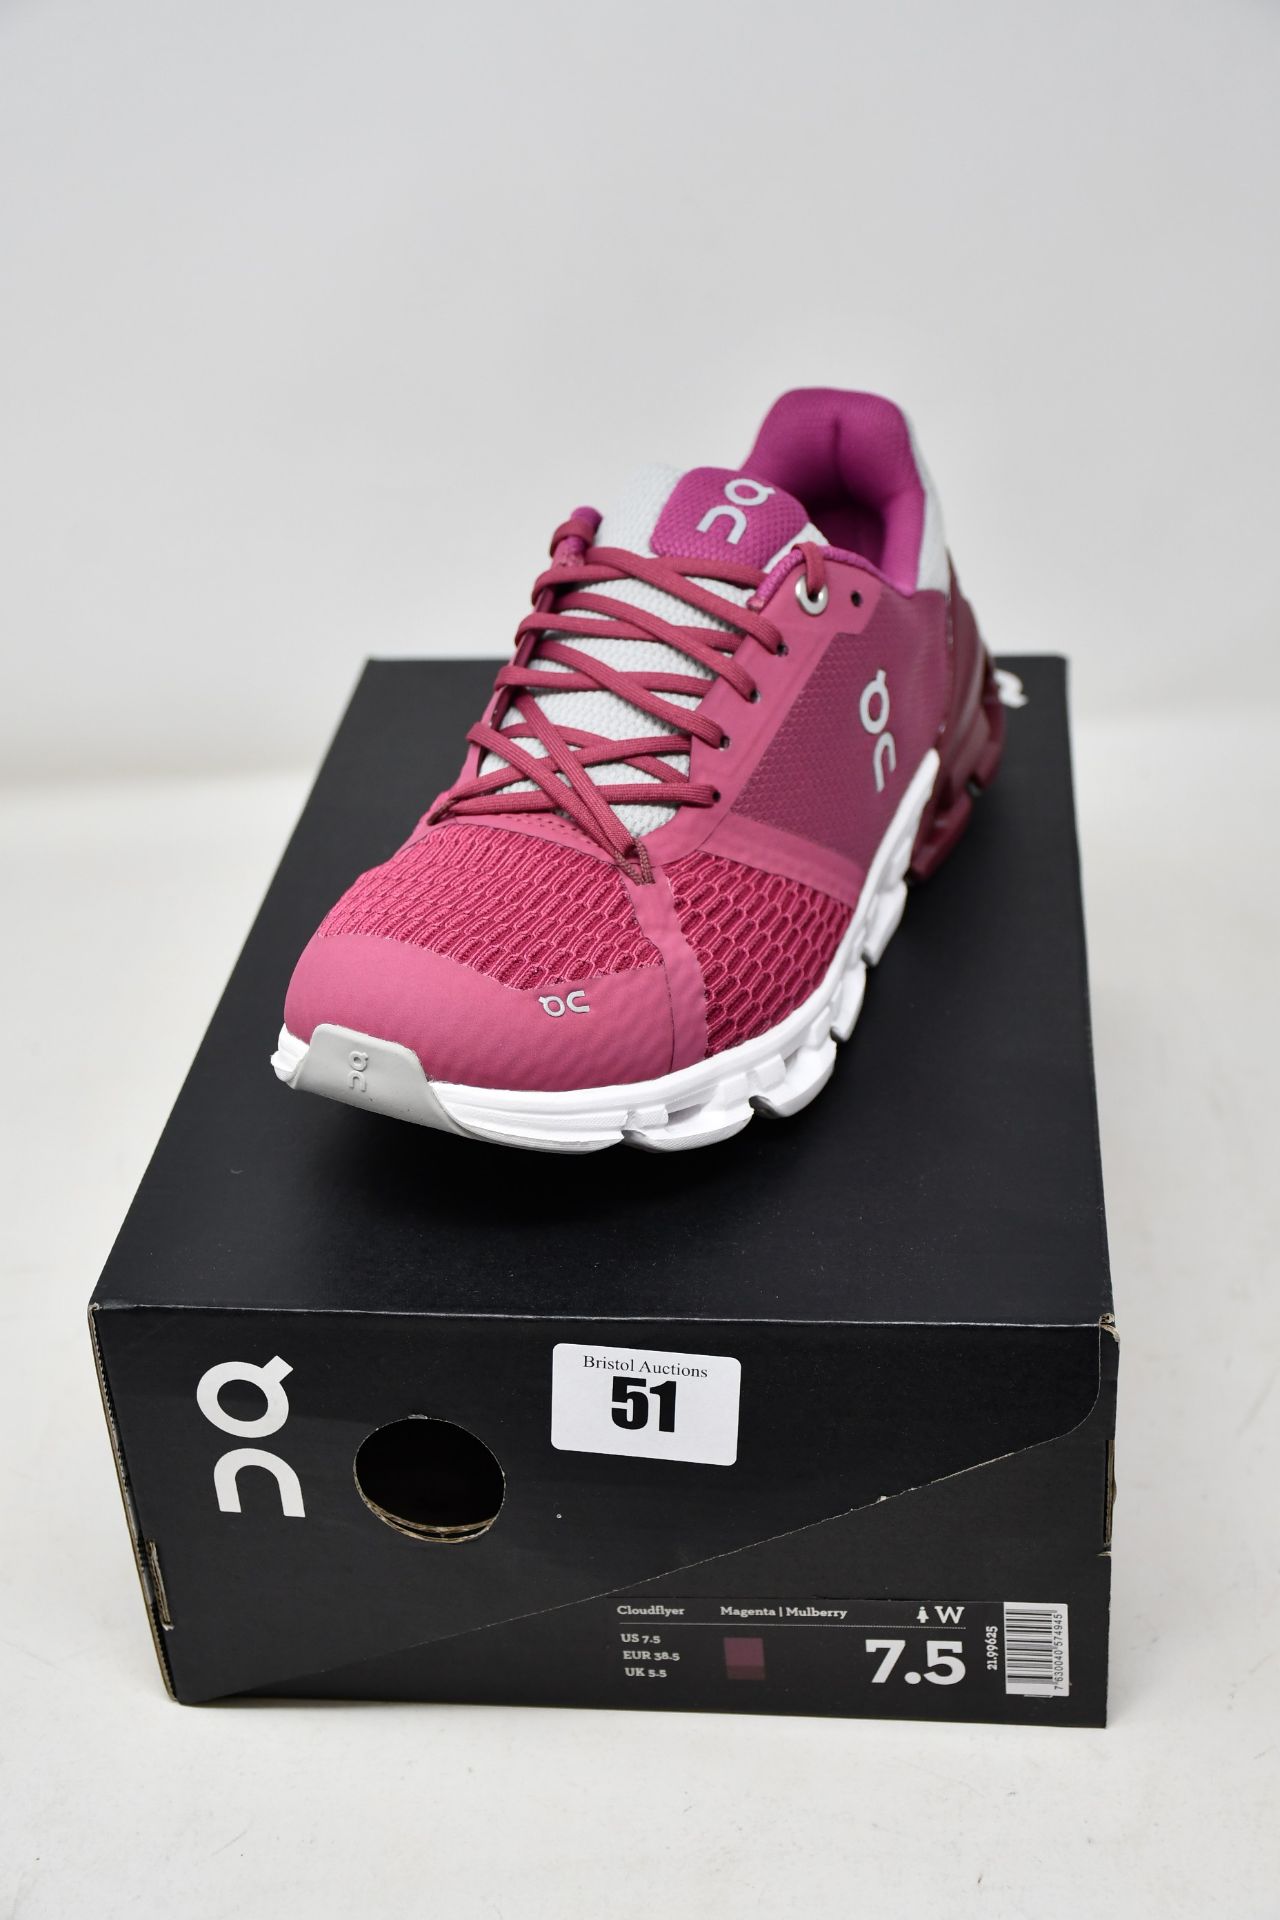 A pair of women's as new On Running Cloudflyer trainers (UK 5.5).